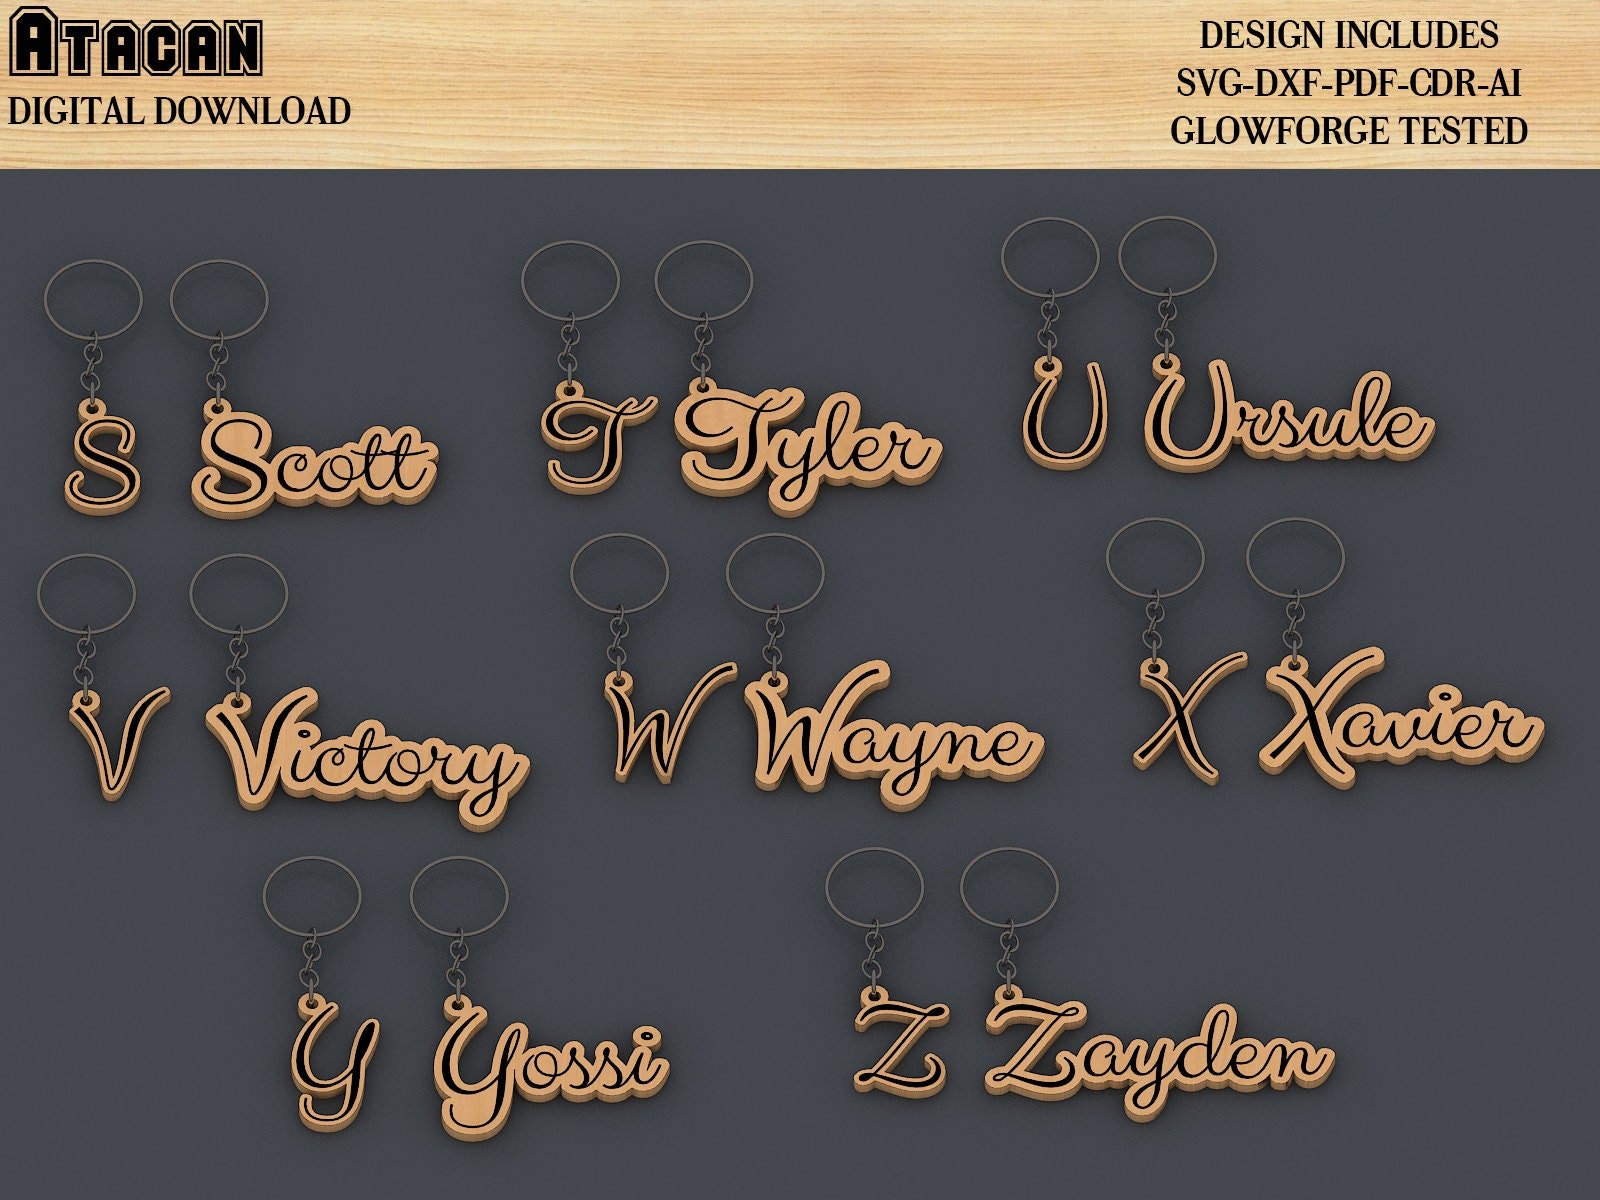 Personalised Name made key chain, necklace, jewelry designs / Letter Glowforge Laser cut SVG files / Cricut Digital Files 381